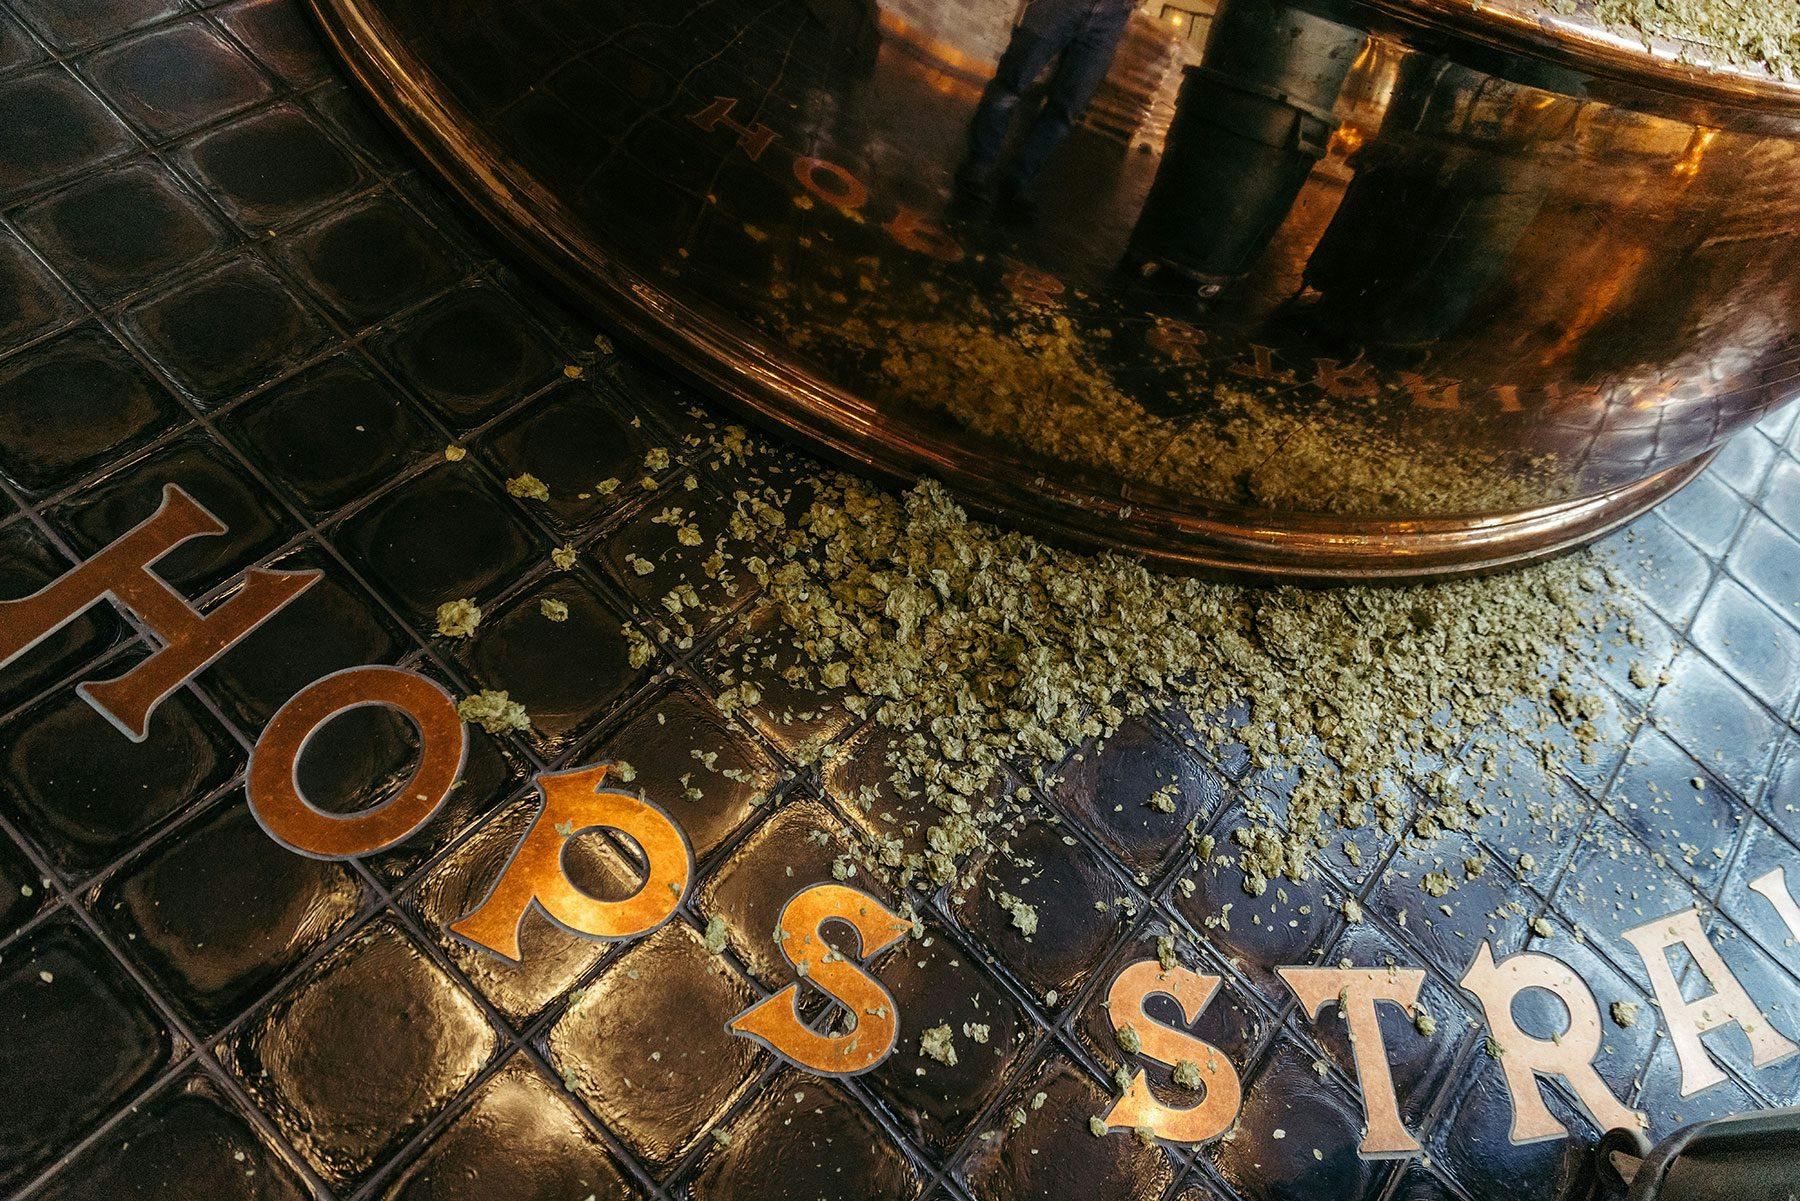 Hops on the ground of the brewhouse inside Sierra Nevada Brewing Co.